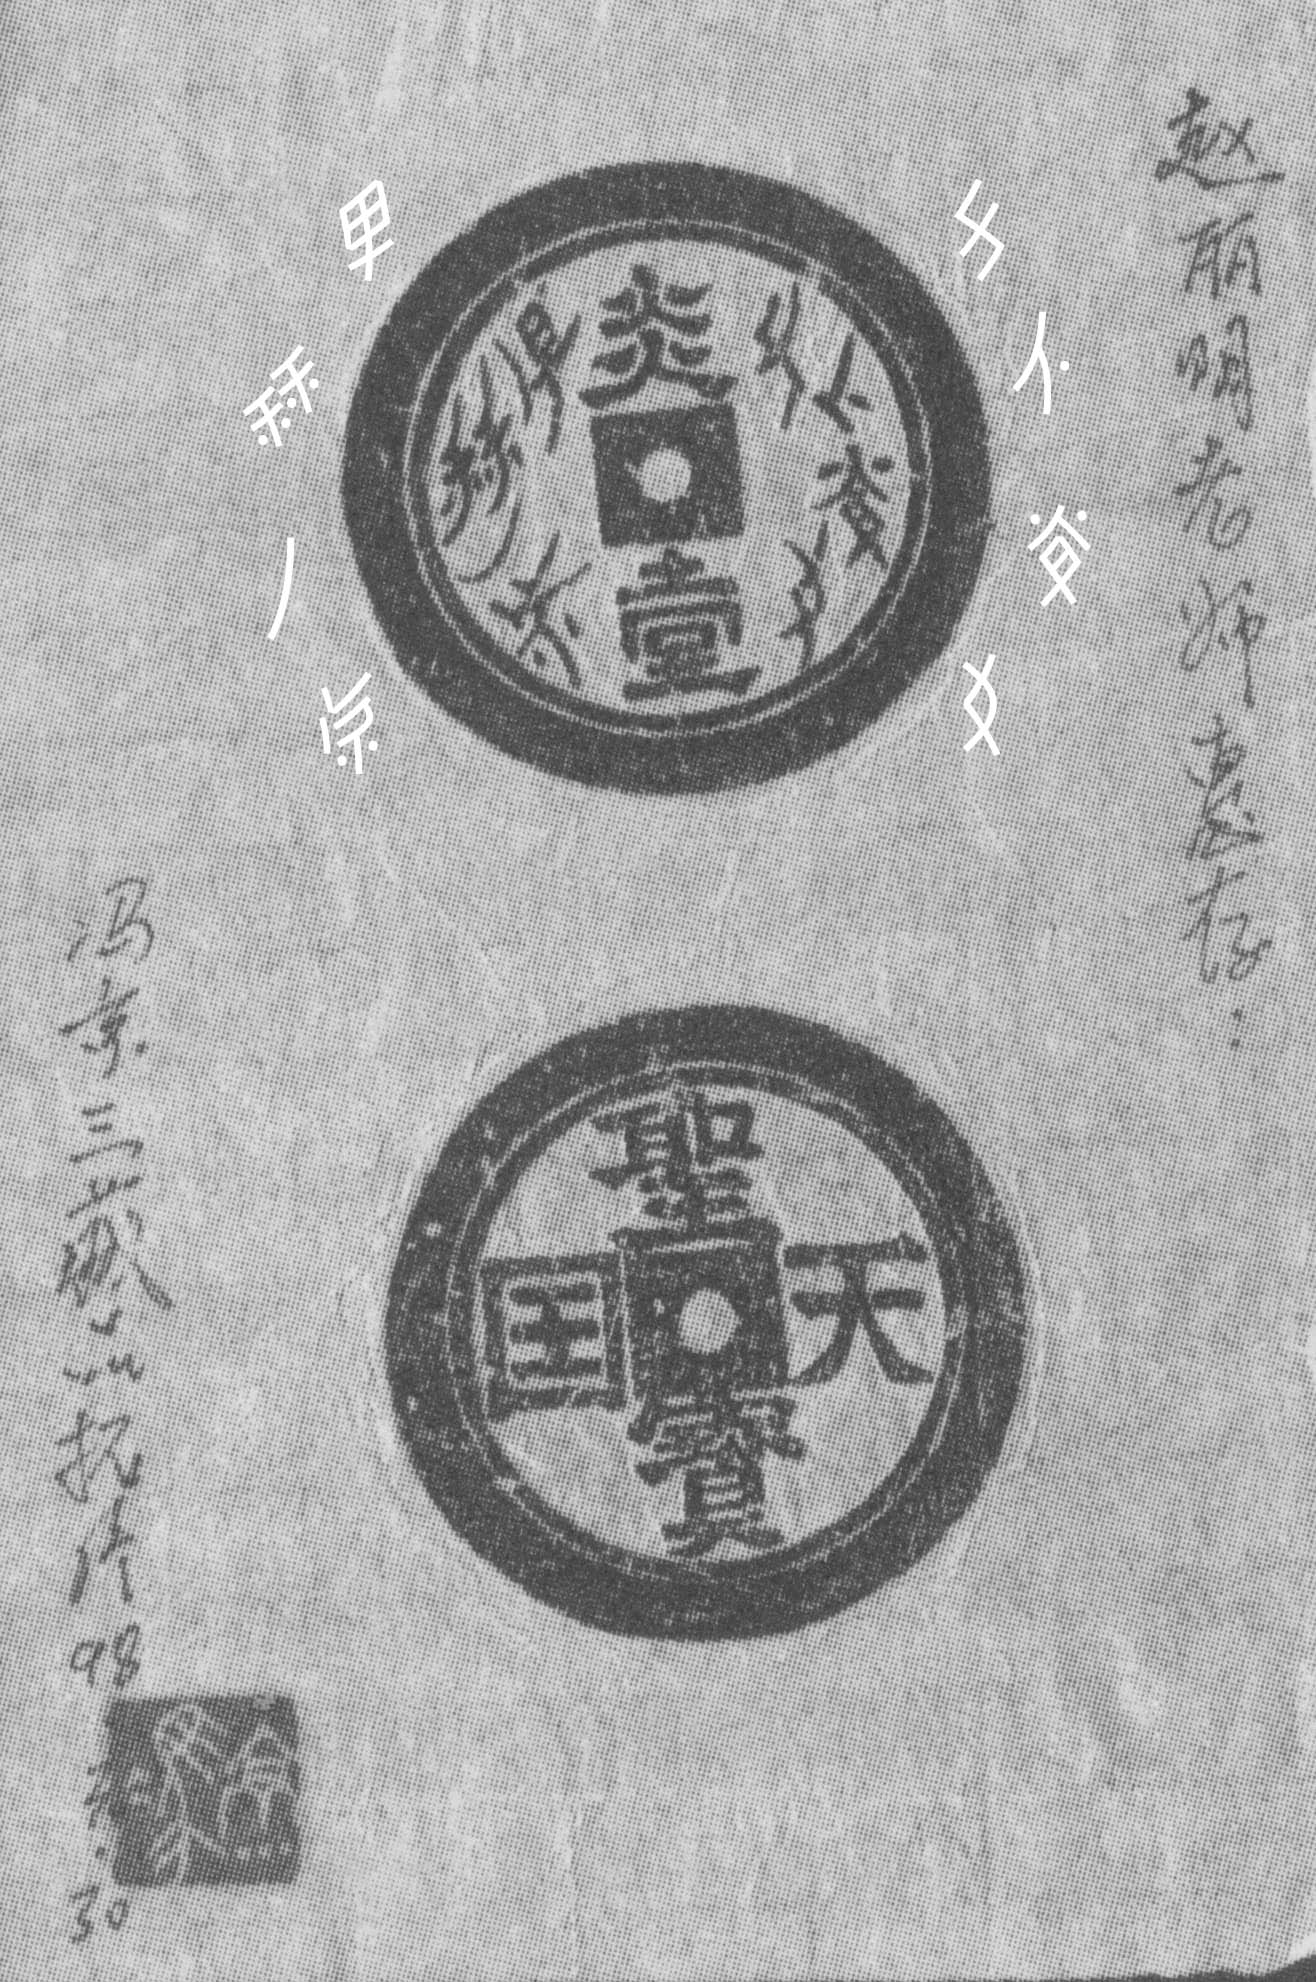 Bronze coin imprints with Nüshu characters on one side